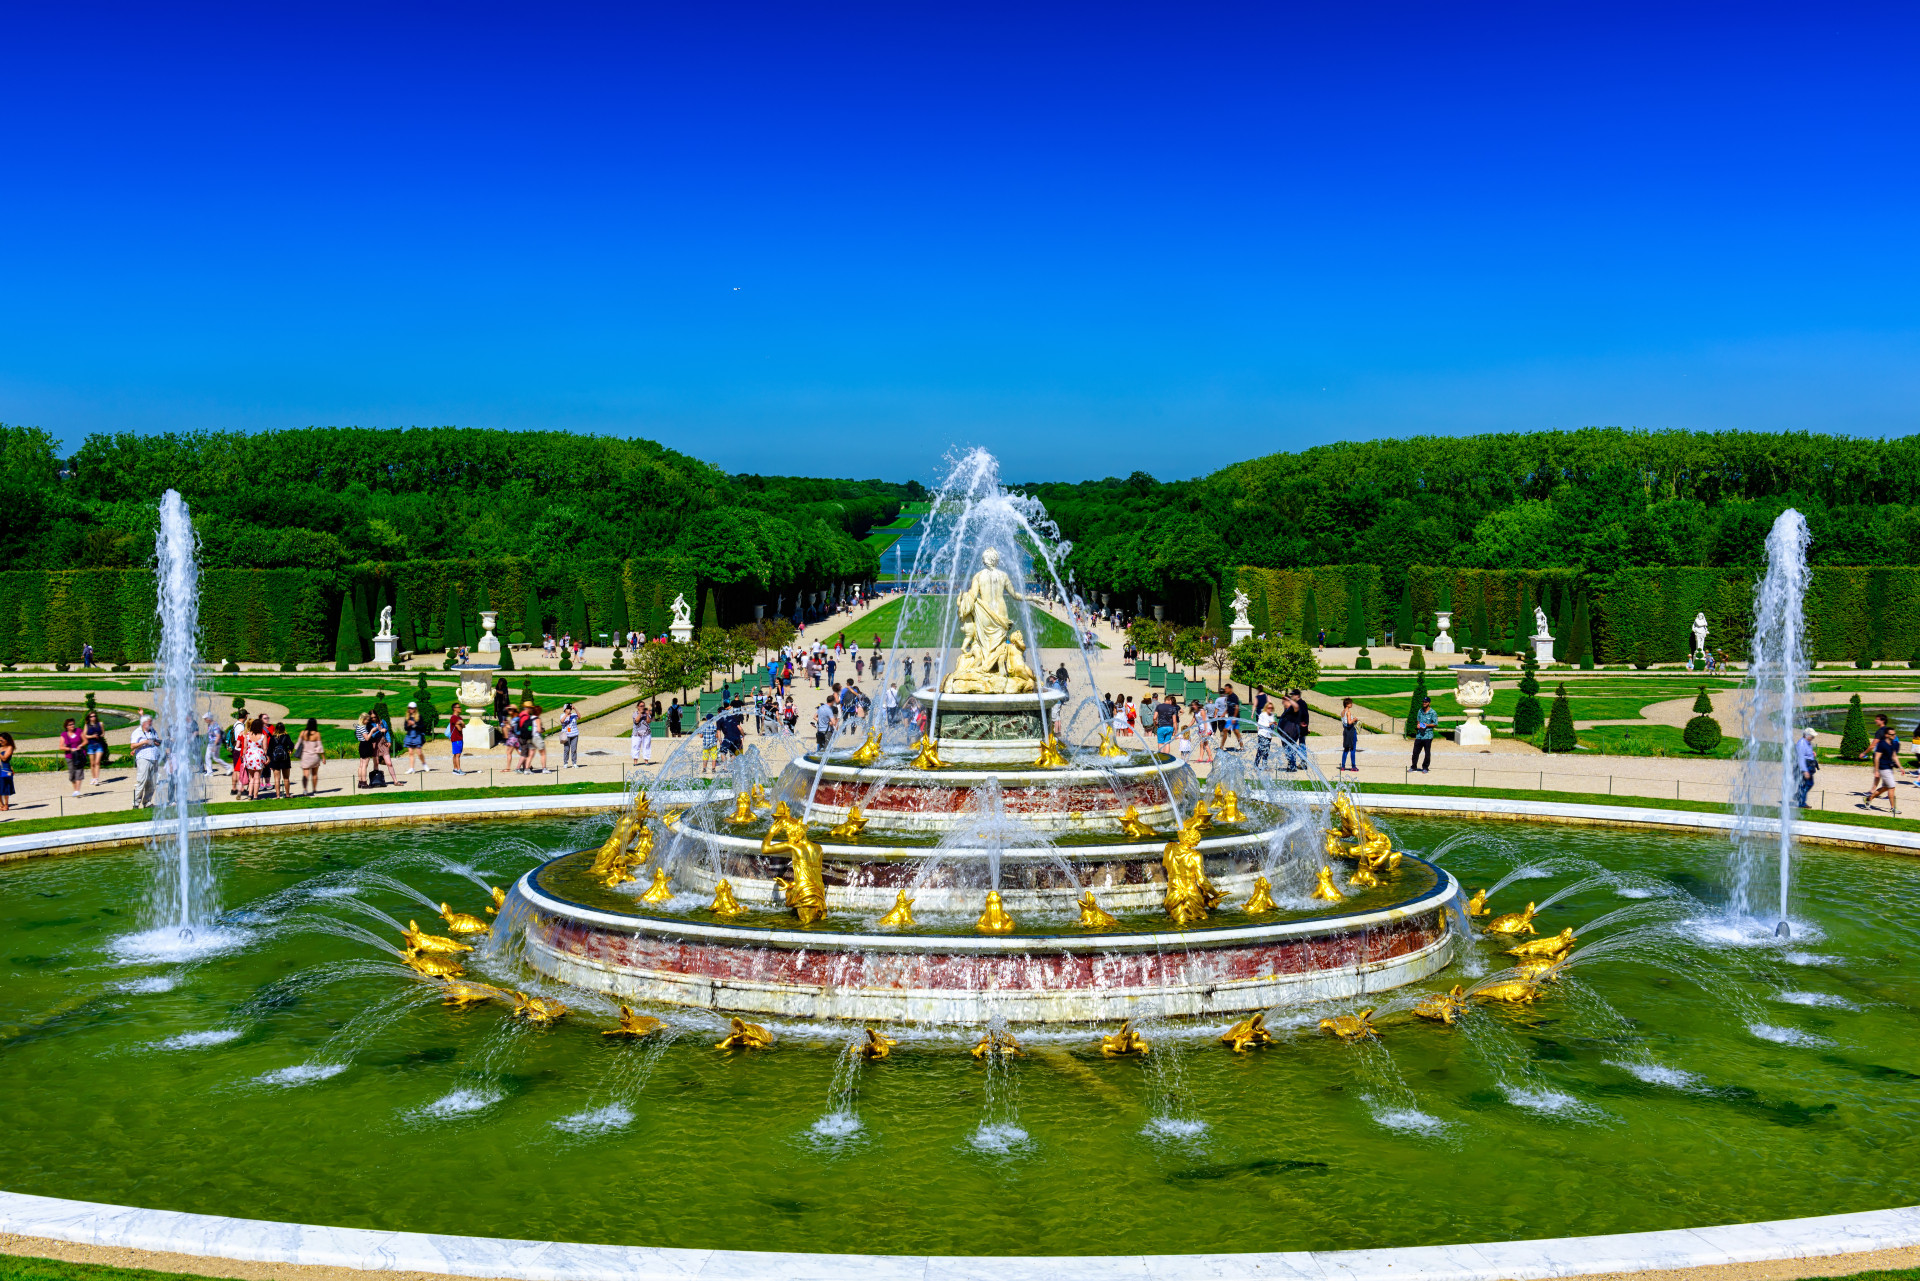 Outside the city is the historic Palace of Versailles. You will need to take a bus there, but a walk around the beautiful palace gardens is something you won't forget.<p>You may also like:<a href="https://www.starsinsider.com/n/192011?utm_source=msn.com&utm_medium=display&utm_campaign=referral_description&utm_content=208346v2en-sg"> British musicians who are almost deaf!</a></p>